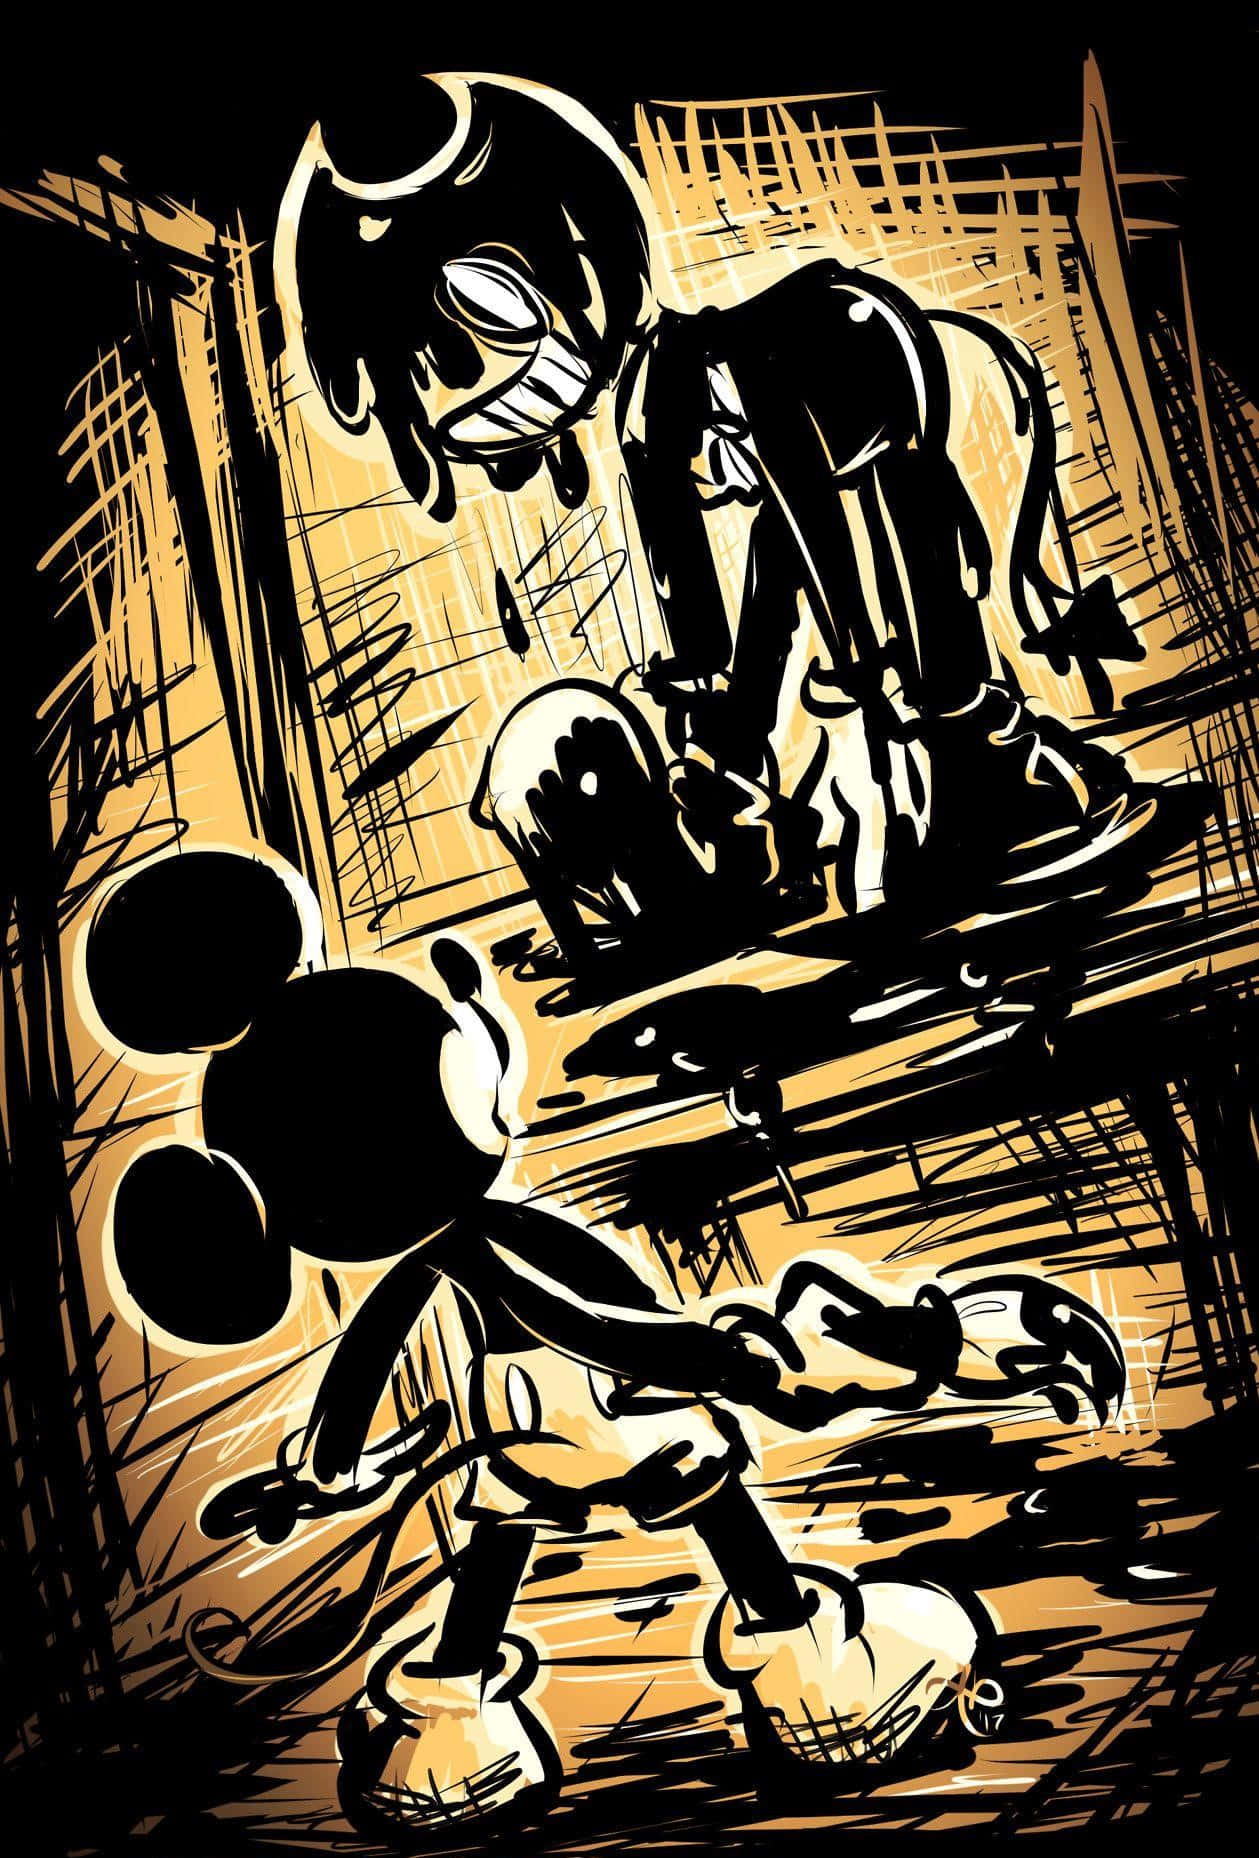 Bendy The Ink Demon Strikes A Pose Against A Retro-styled Ink Factory Background.